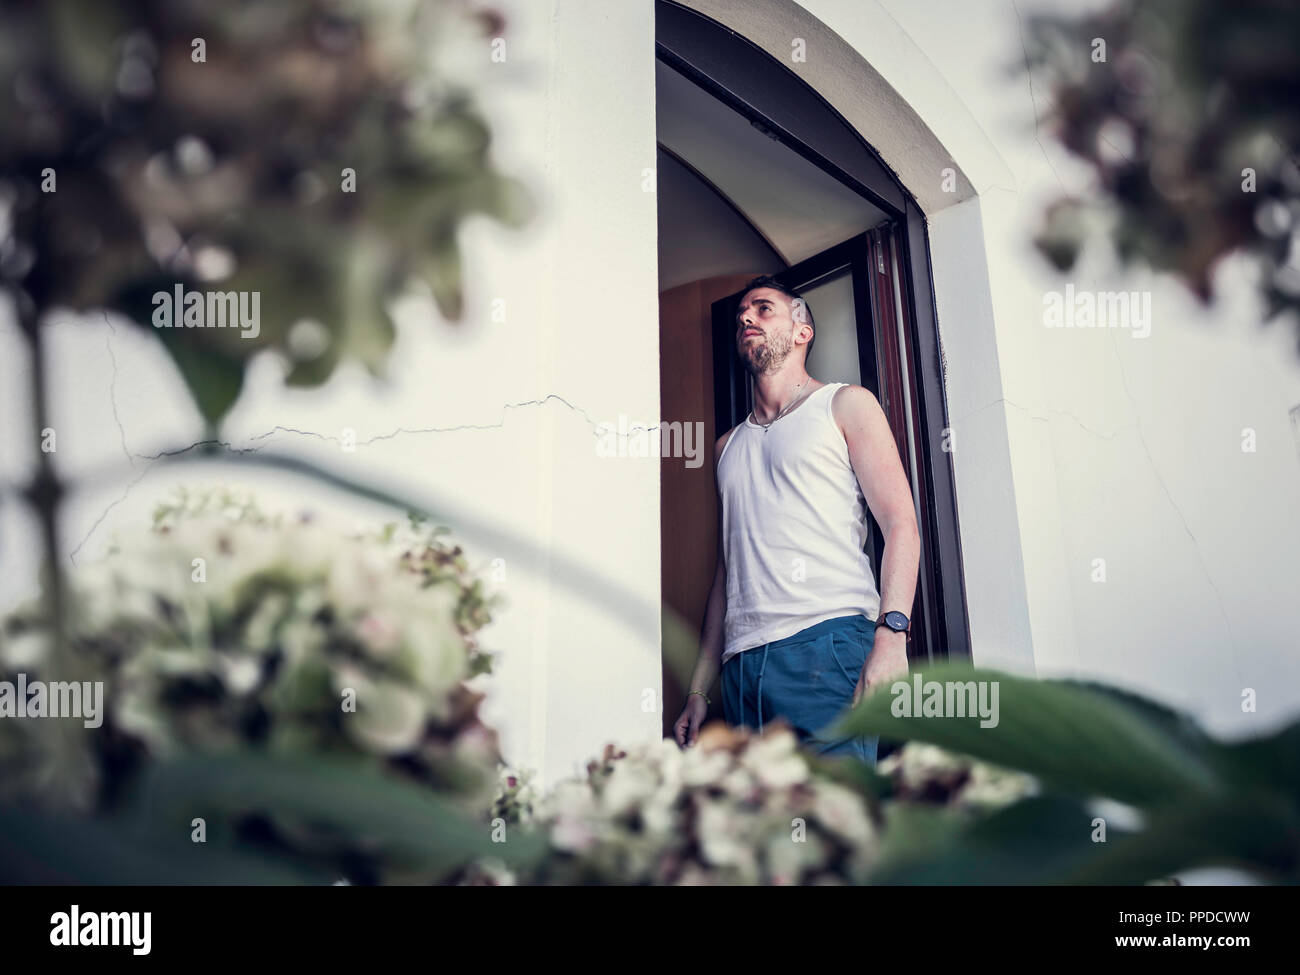 Young man with beard standing in the window frame with white shirt surrounded by vegetation Stock Photo